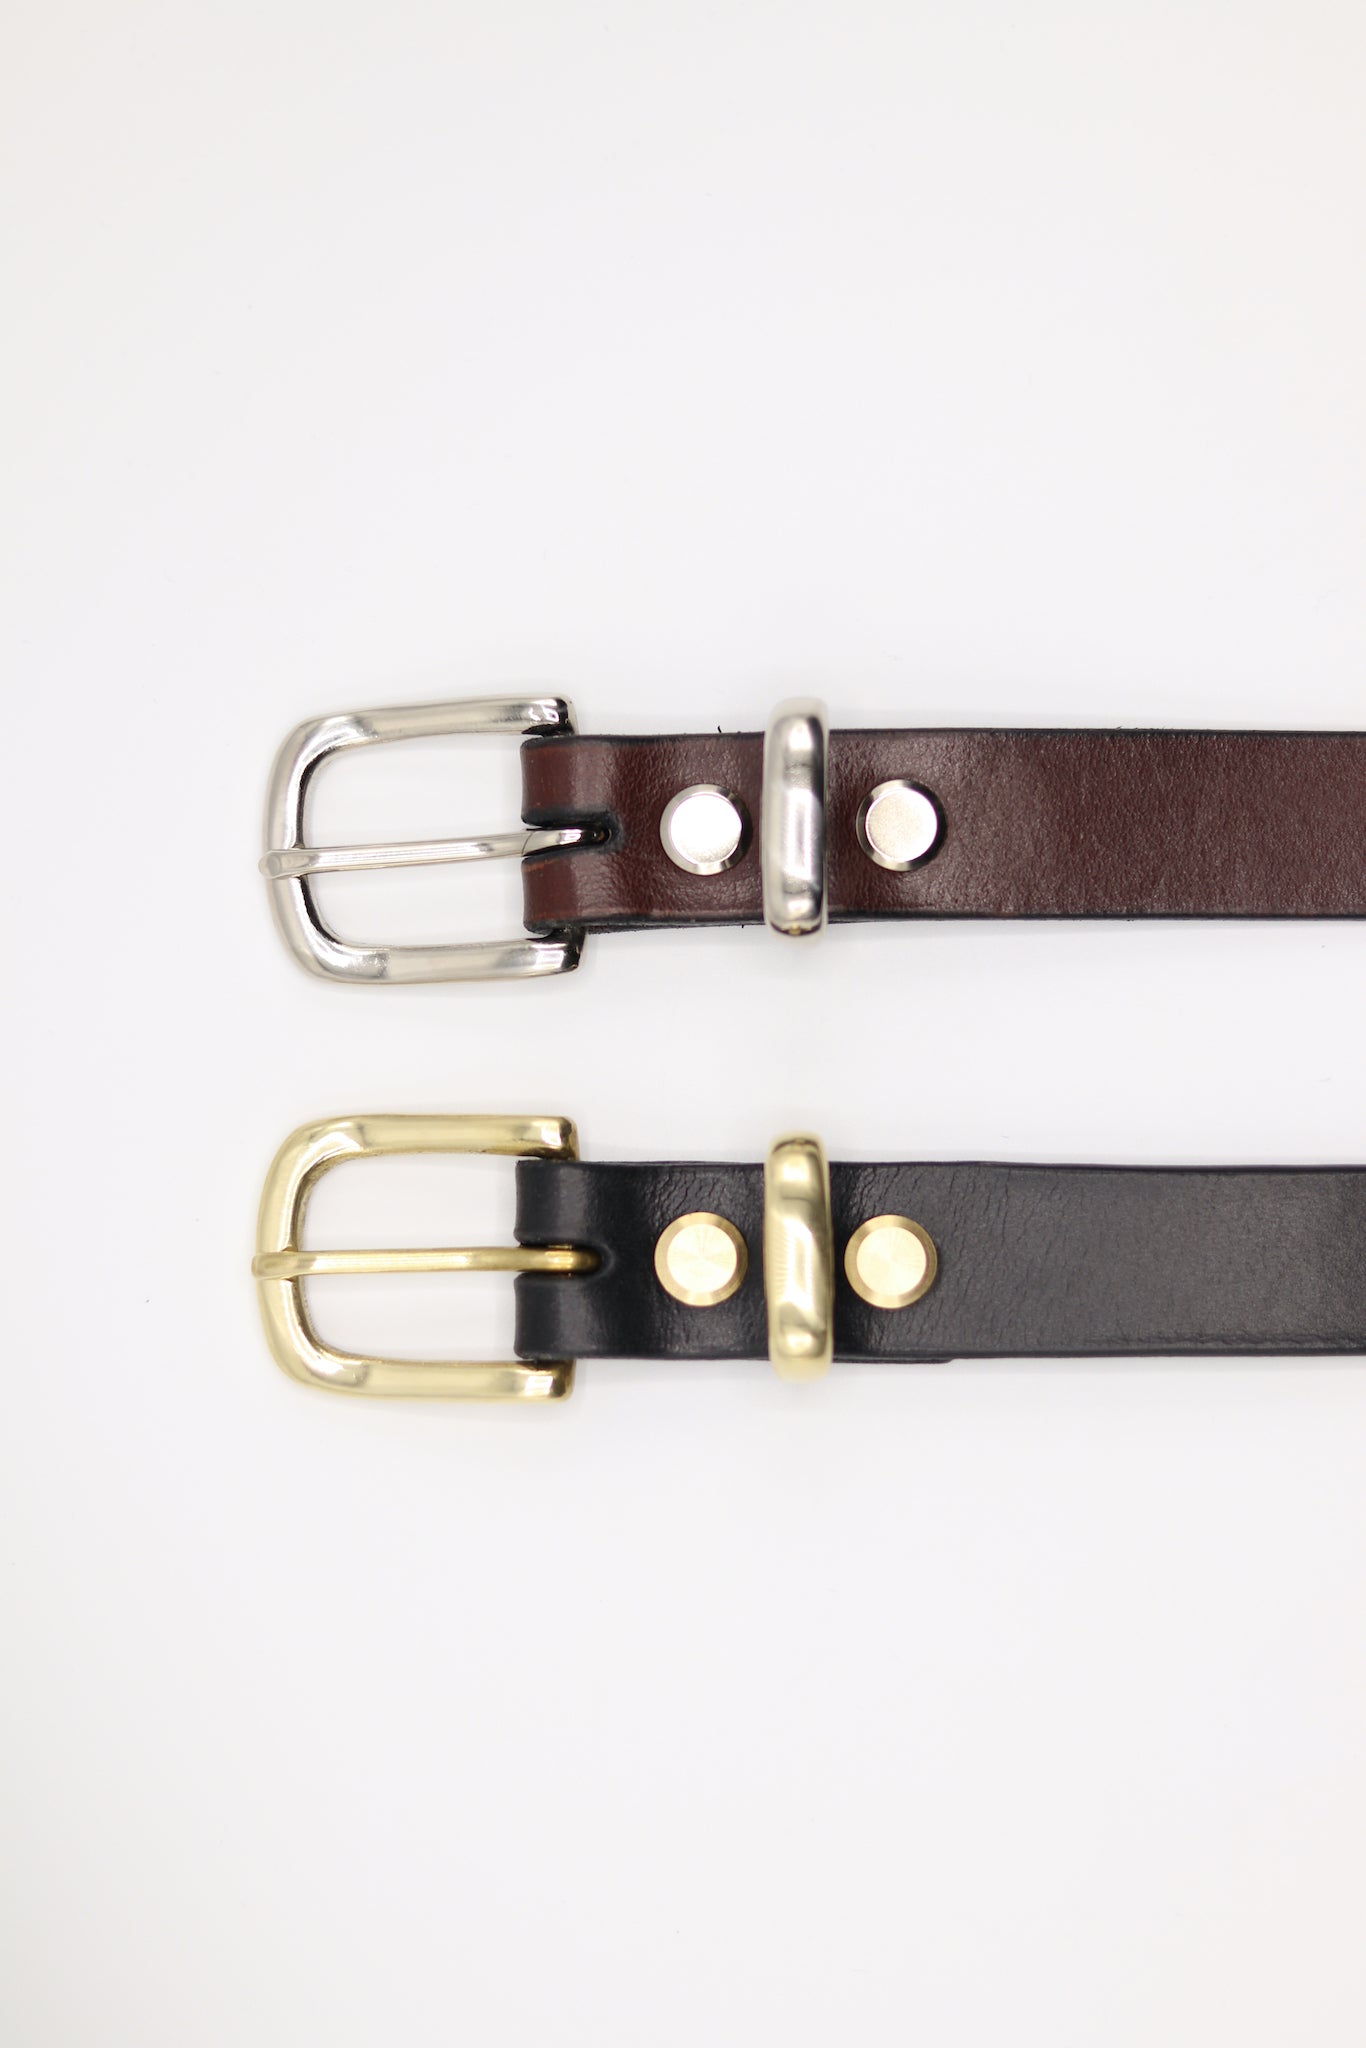 Black with Nickel and Brown with Solid Brass Hardware on Womens Brown English Bridle Leather Belt 25mm